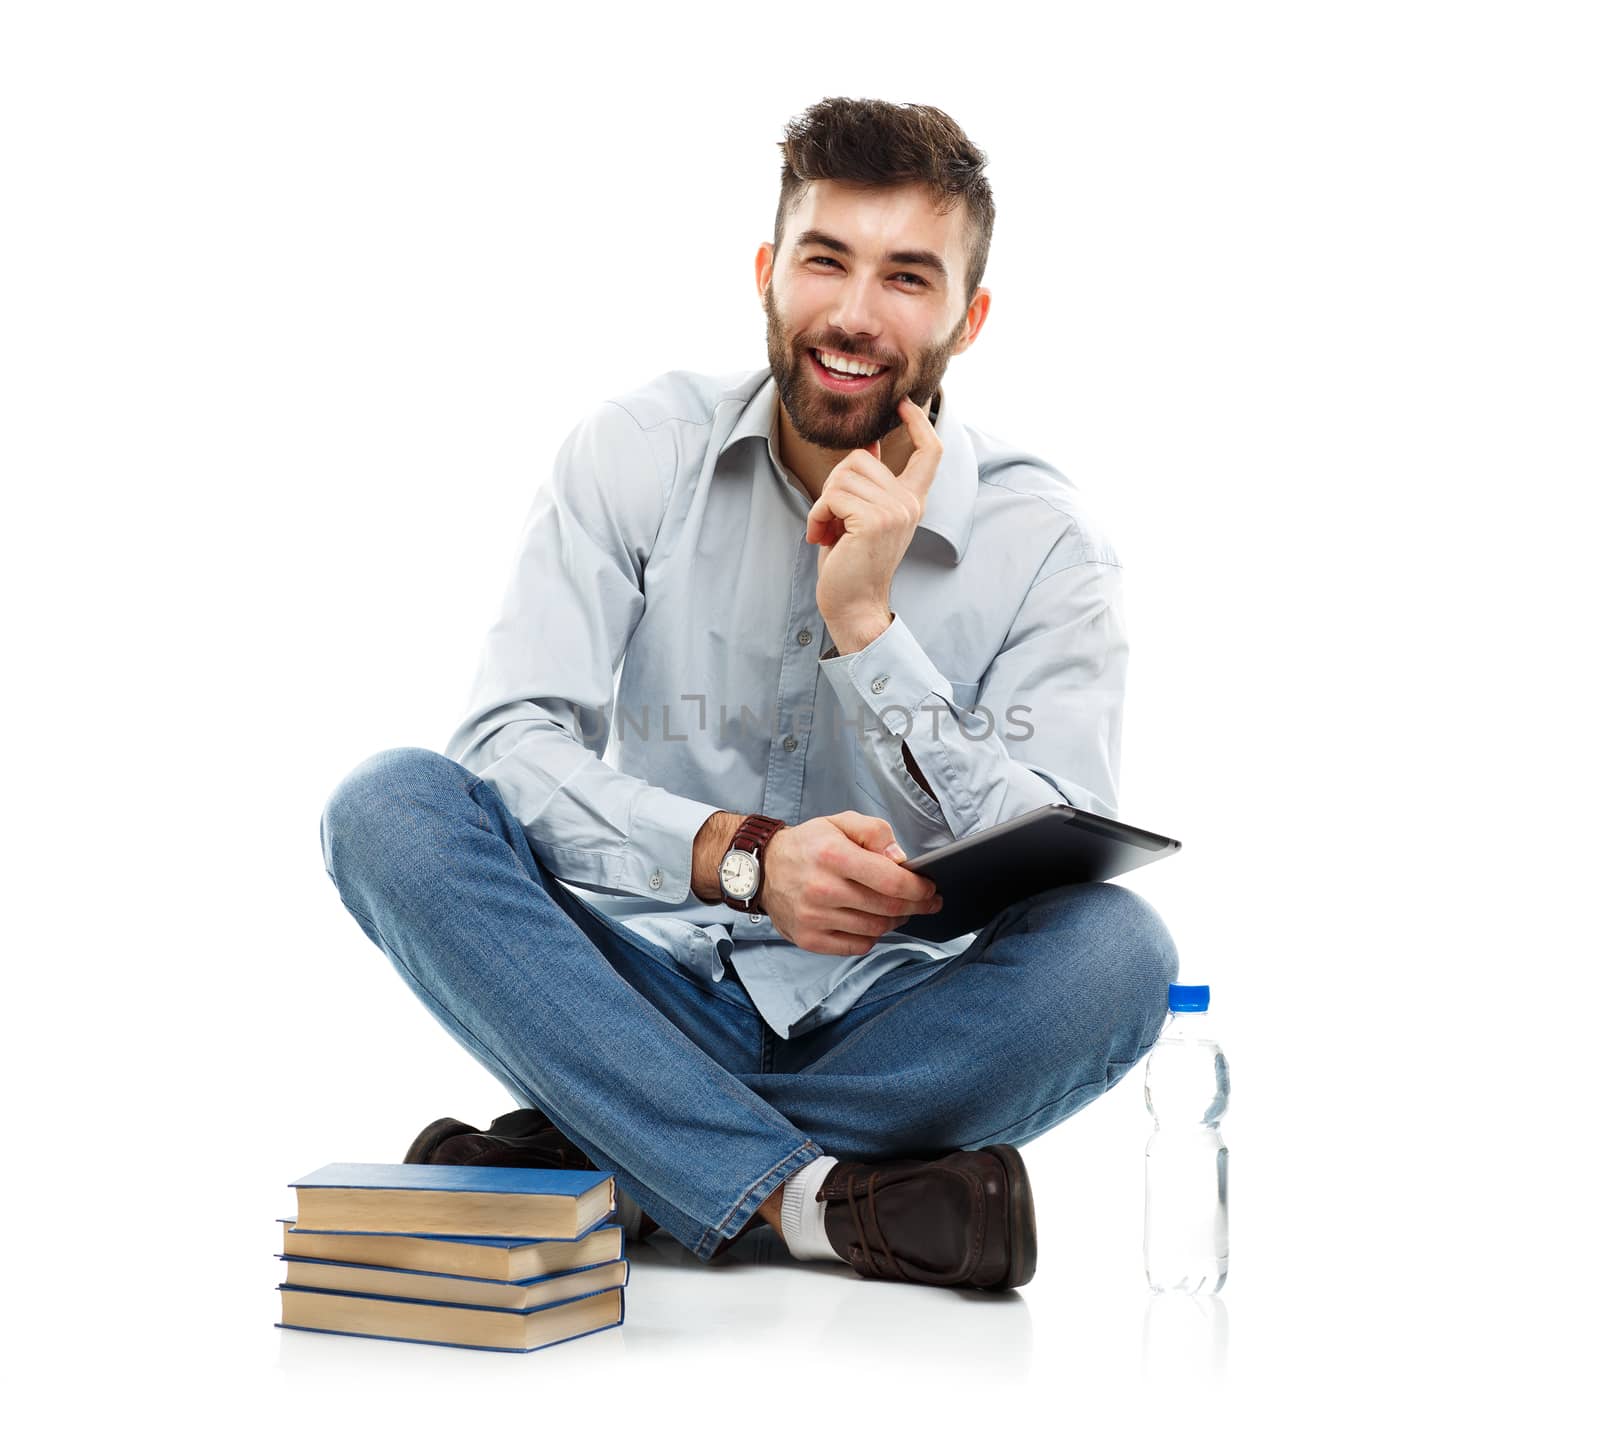 Young bearded smiling man holding a tablet with books and a bottle of water sitting on a white background